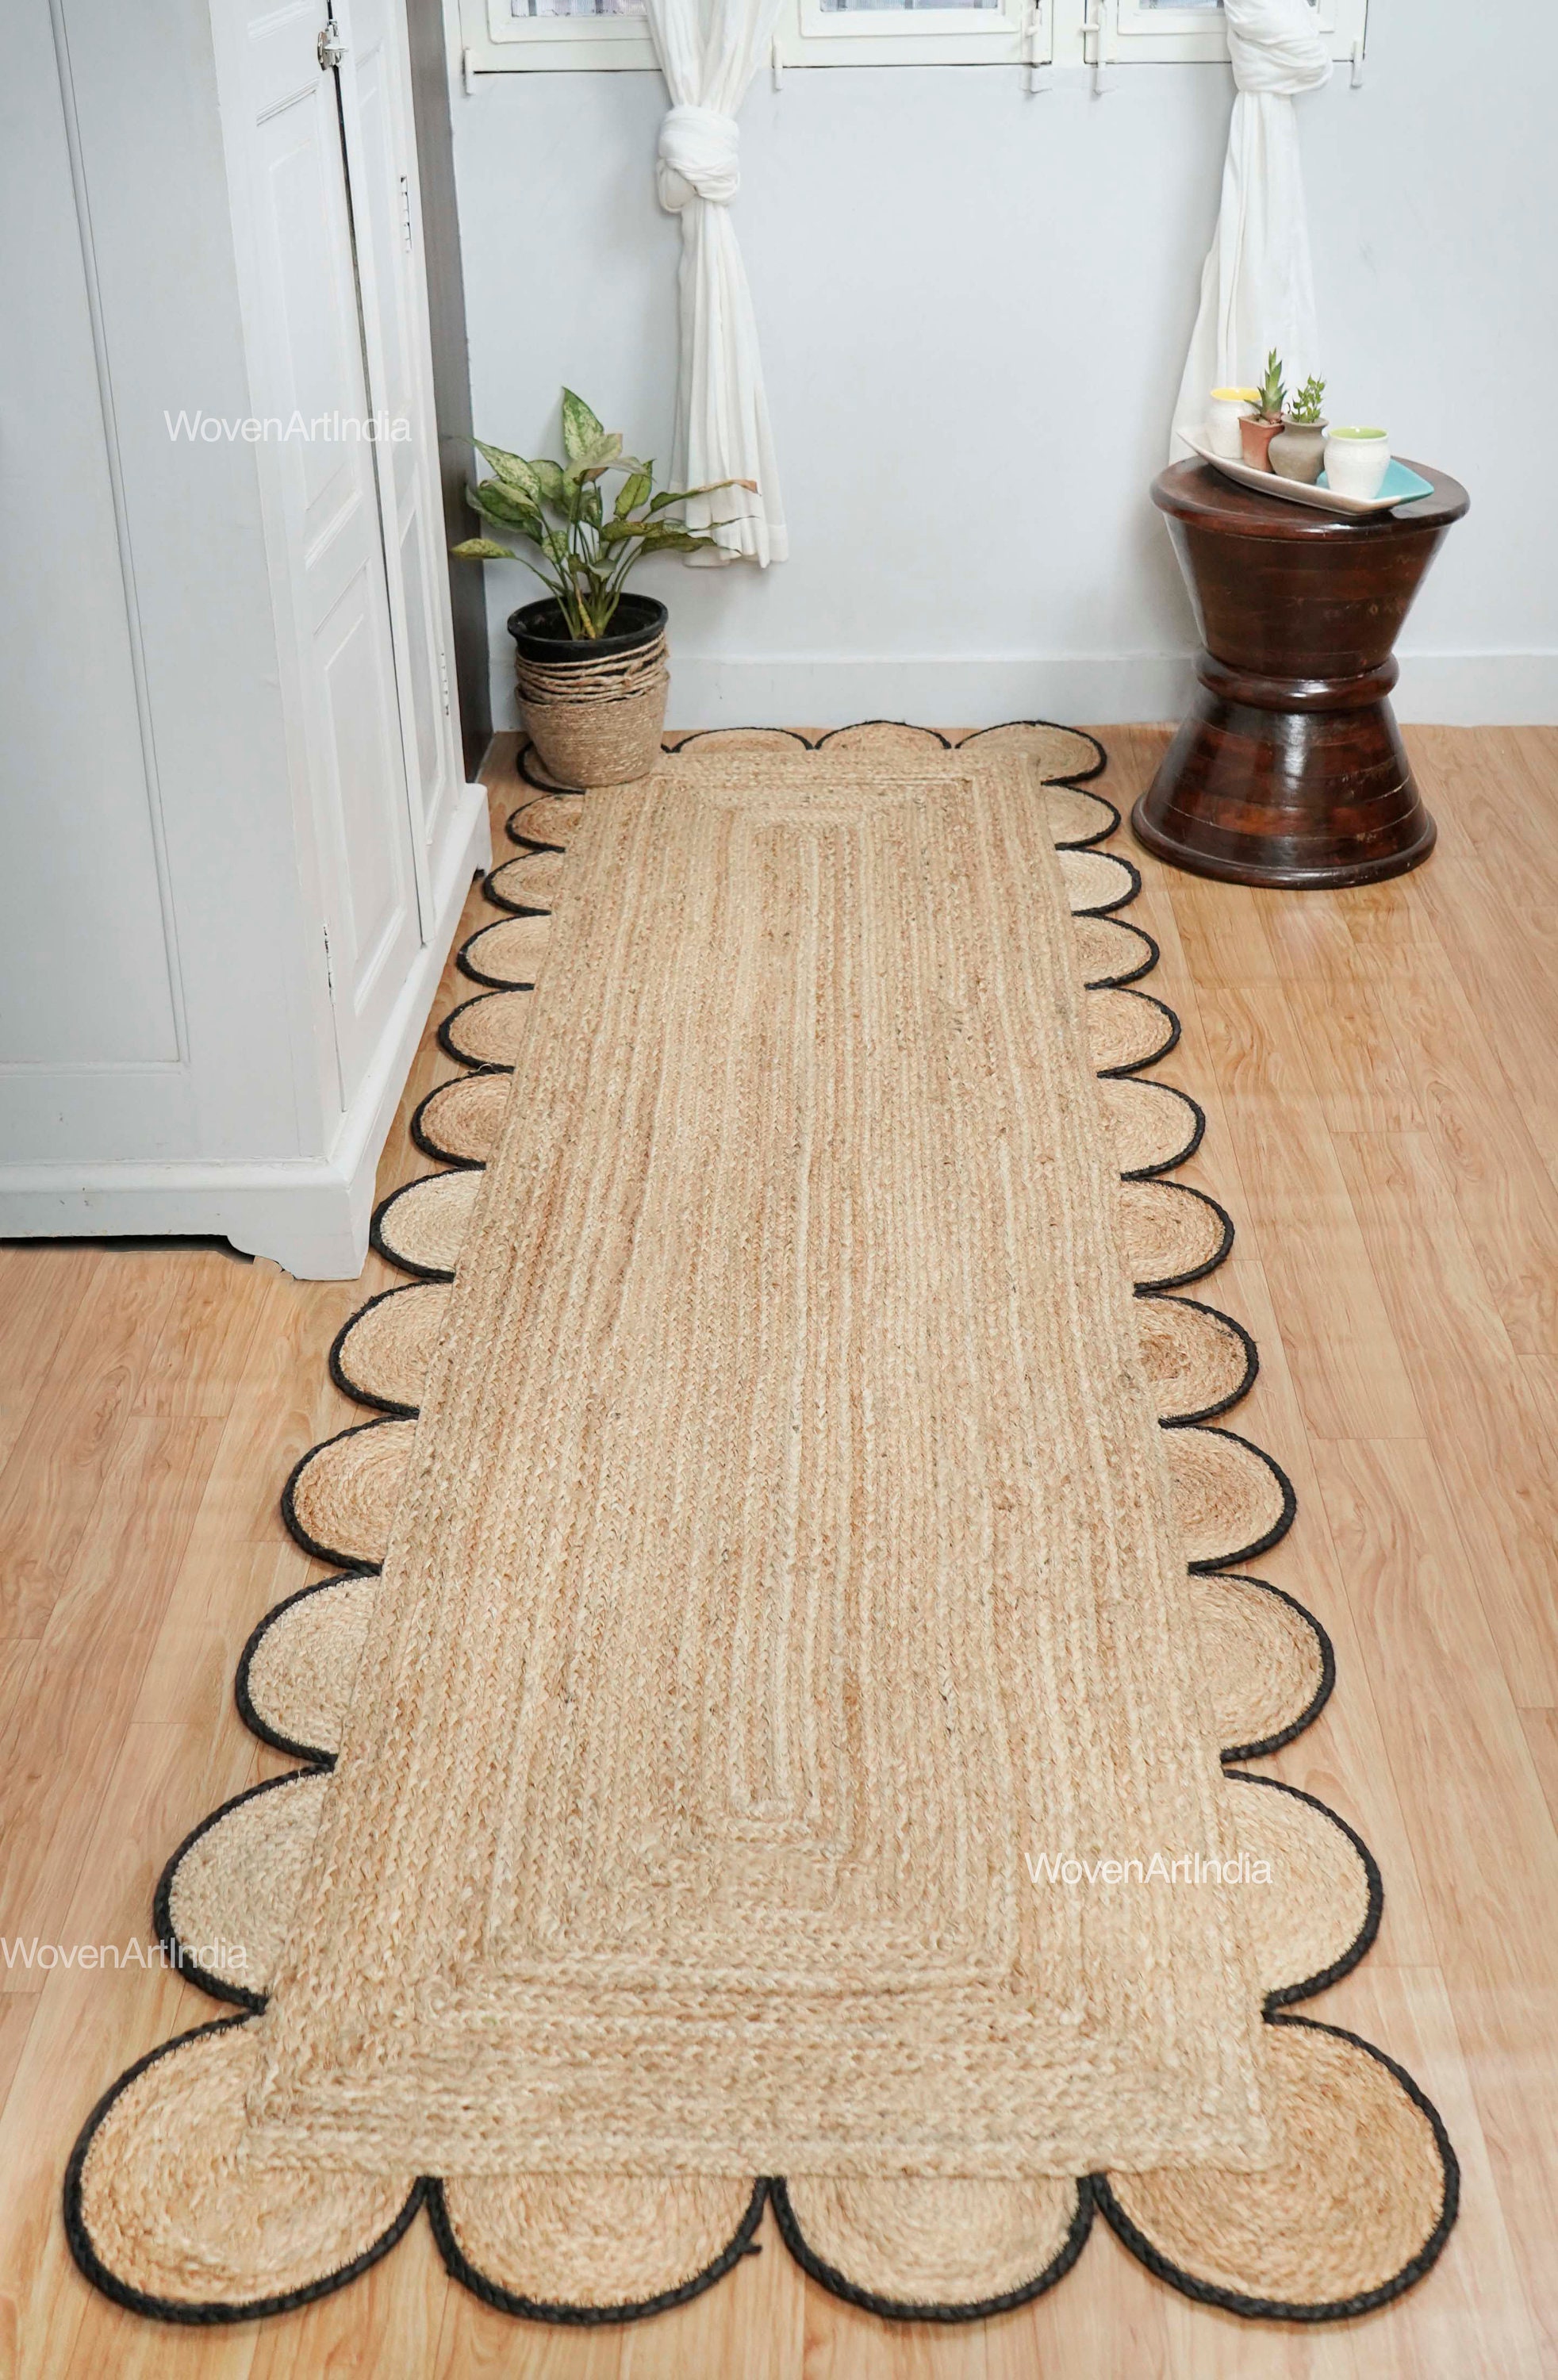 Cream / Grey Hand Woven Chunky Braided Hand Knitted, Modern Style Wool Area  Indoor Rug. Customization Available Thebrothersisterco 